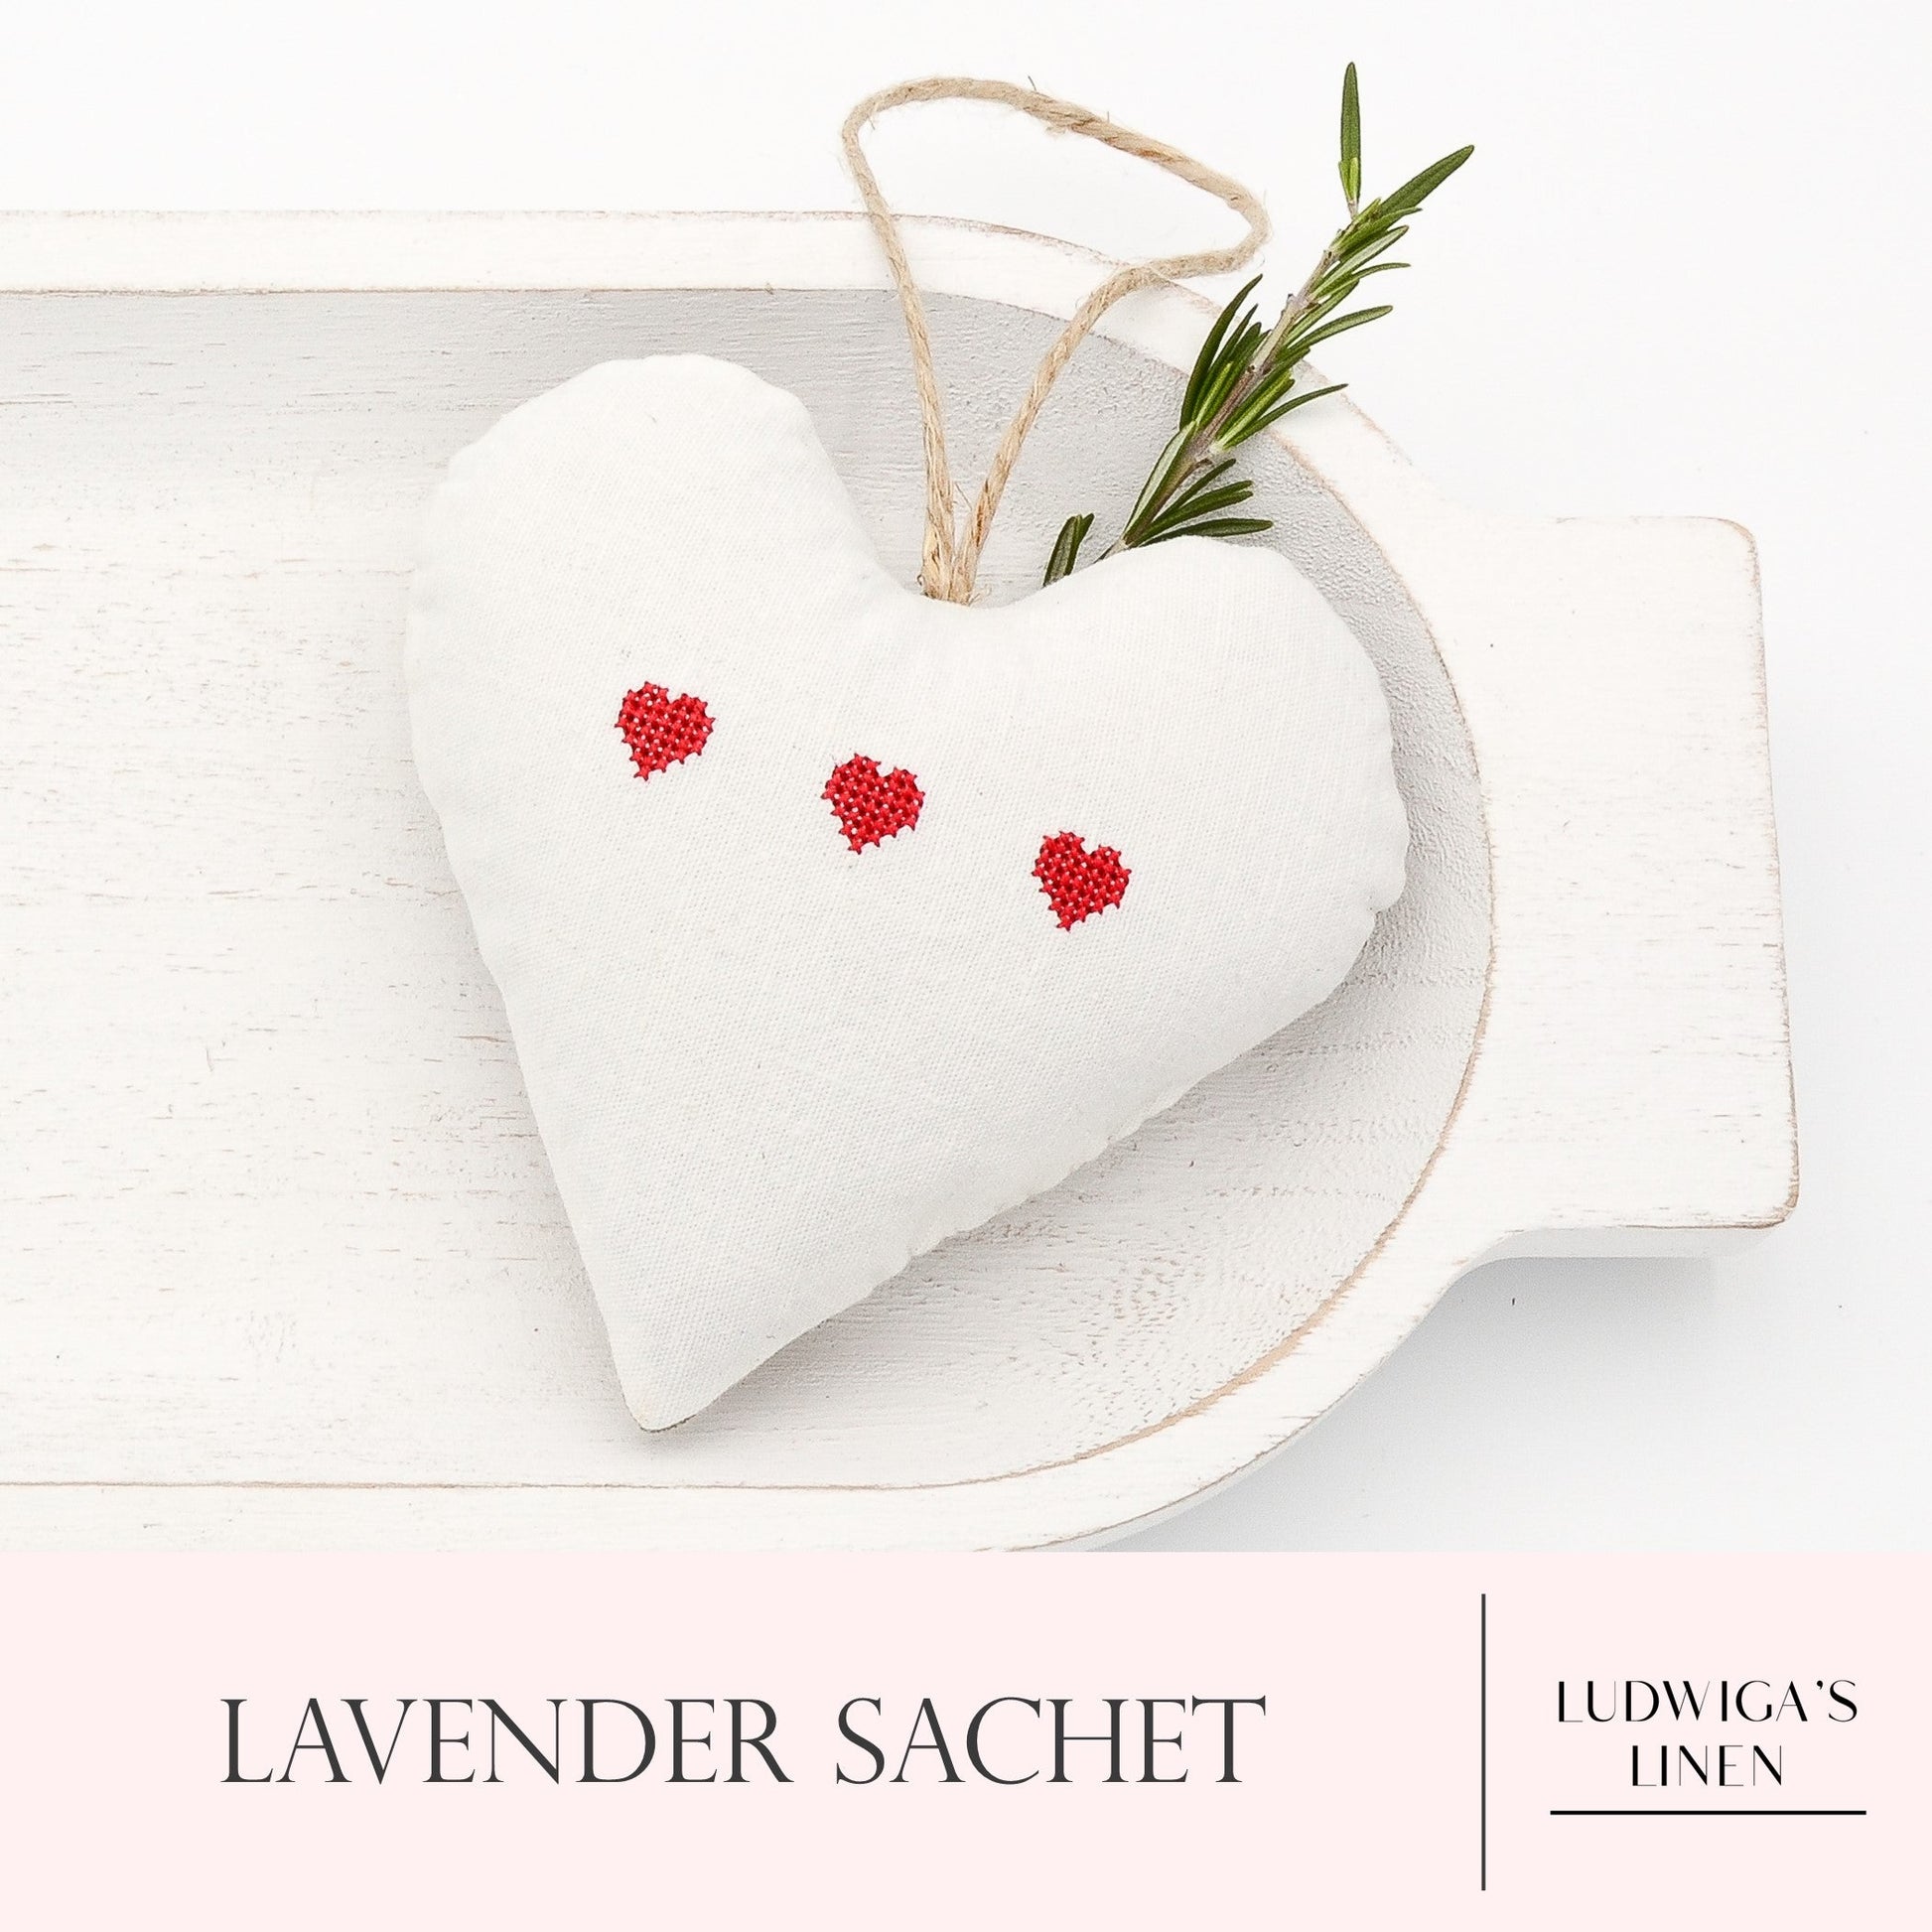 Antique/vintage European white linen lavender sachet heart with three red embroidered hearts, hemp twine tie and filled with high quality lavender from Provence France